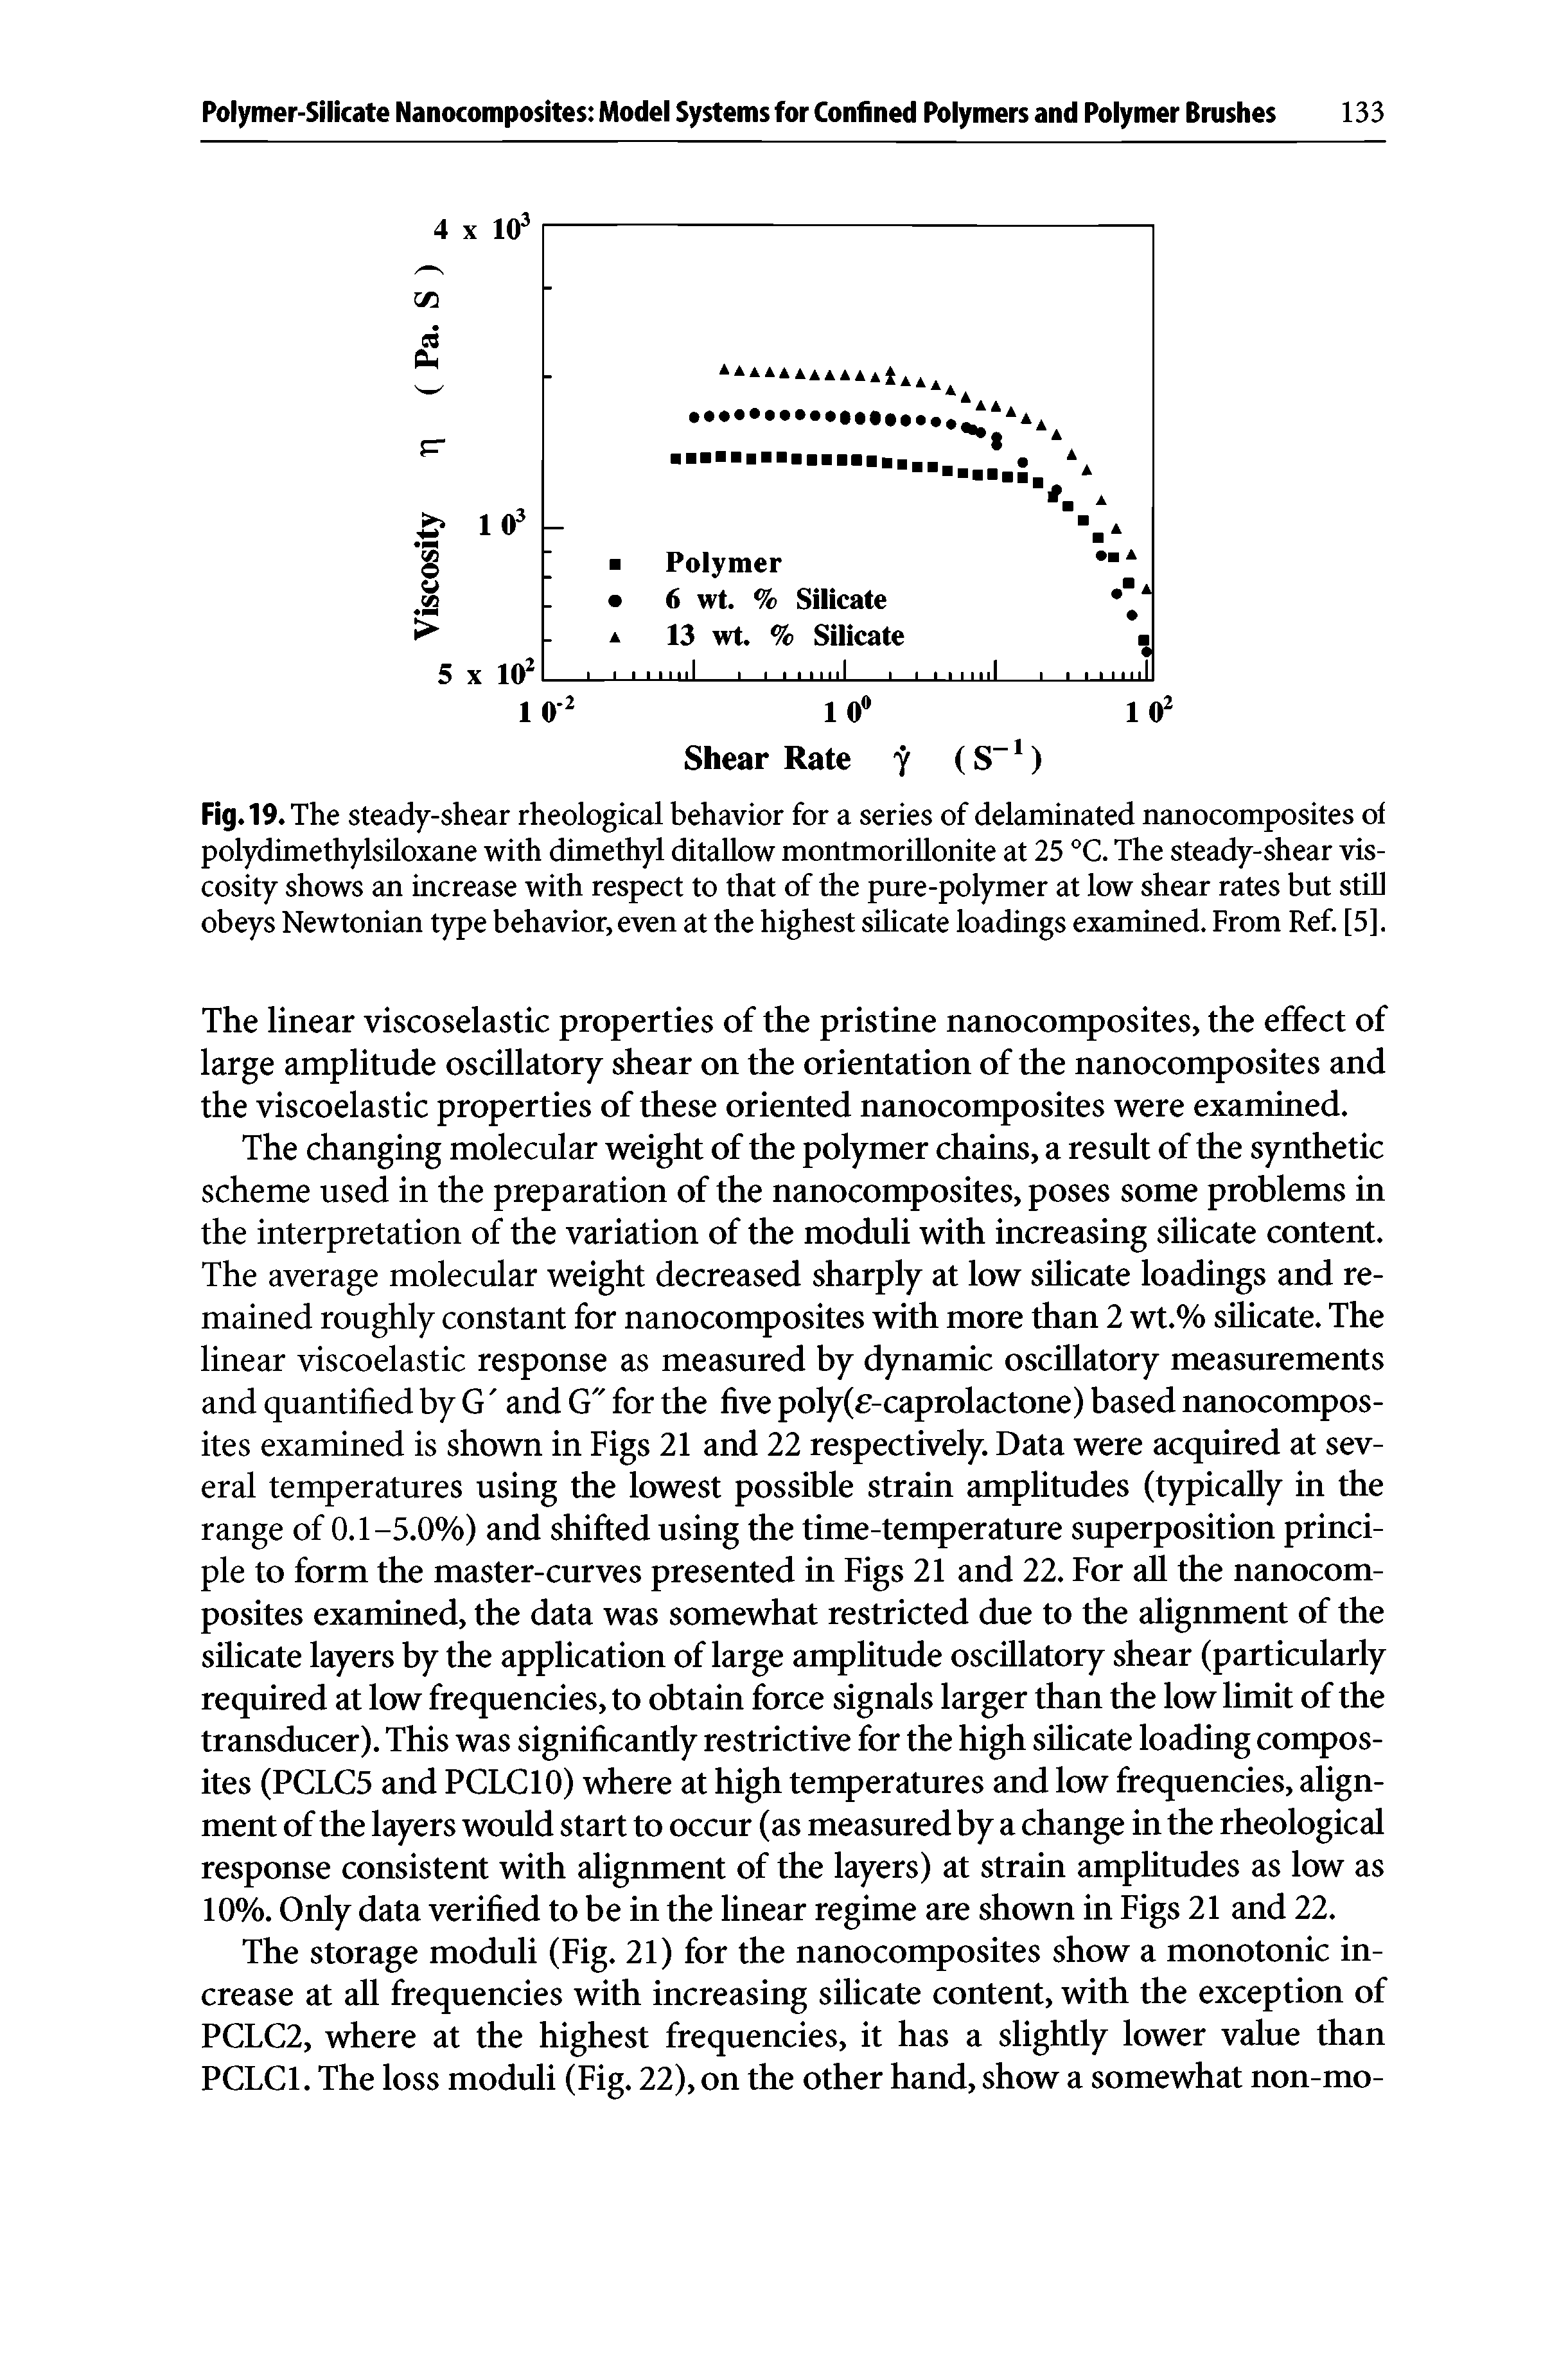 Fig. 19. The steady-shear rheological behavior for a series of delaminated nanocomposites ol polydimethylsiloxane with dimethyl ditallow montmorillonite at 25 °C. The steady-shear viscosity shows an increase with respect to that of the pure-polymer at low shear rates but still obeys Newtonian type behavior, even at the highest silicate loadings examined. From Ref. [5].